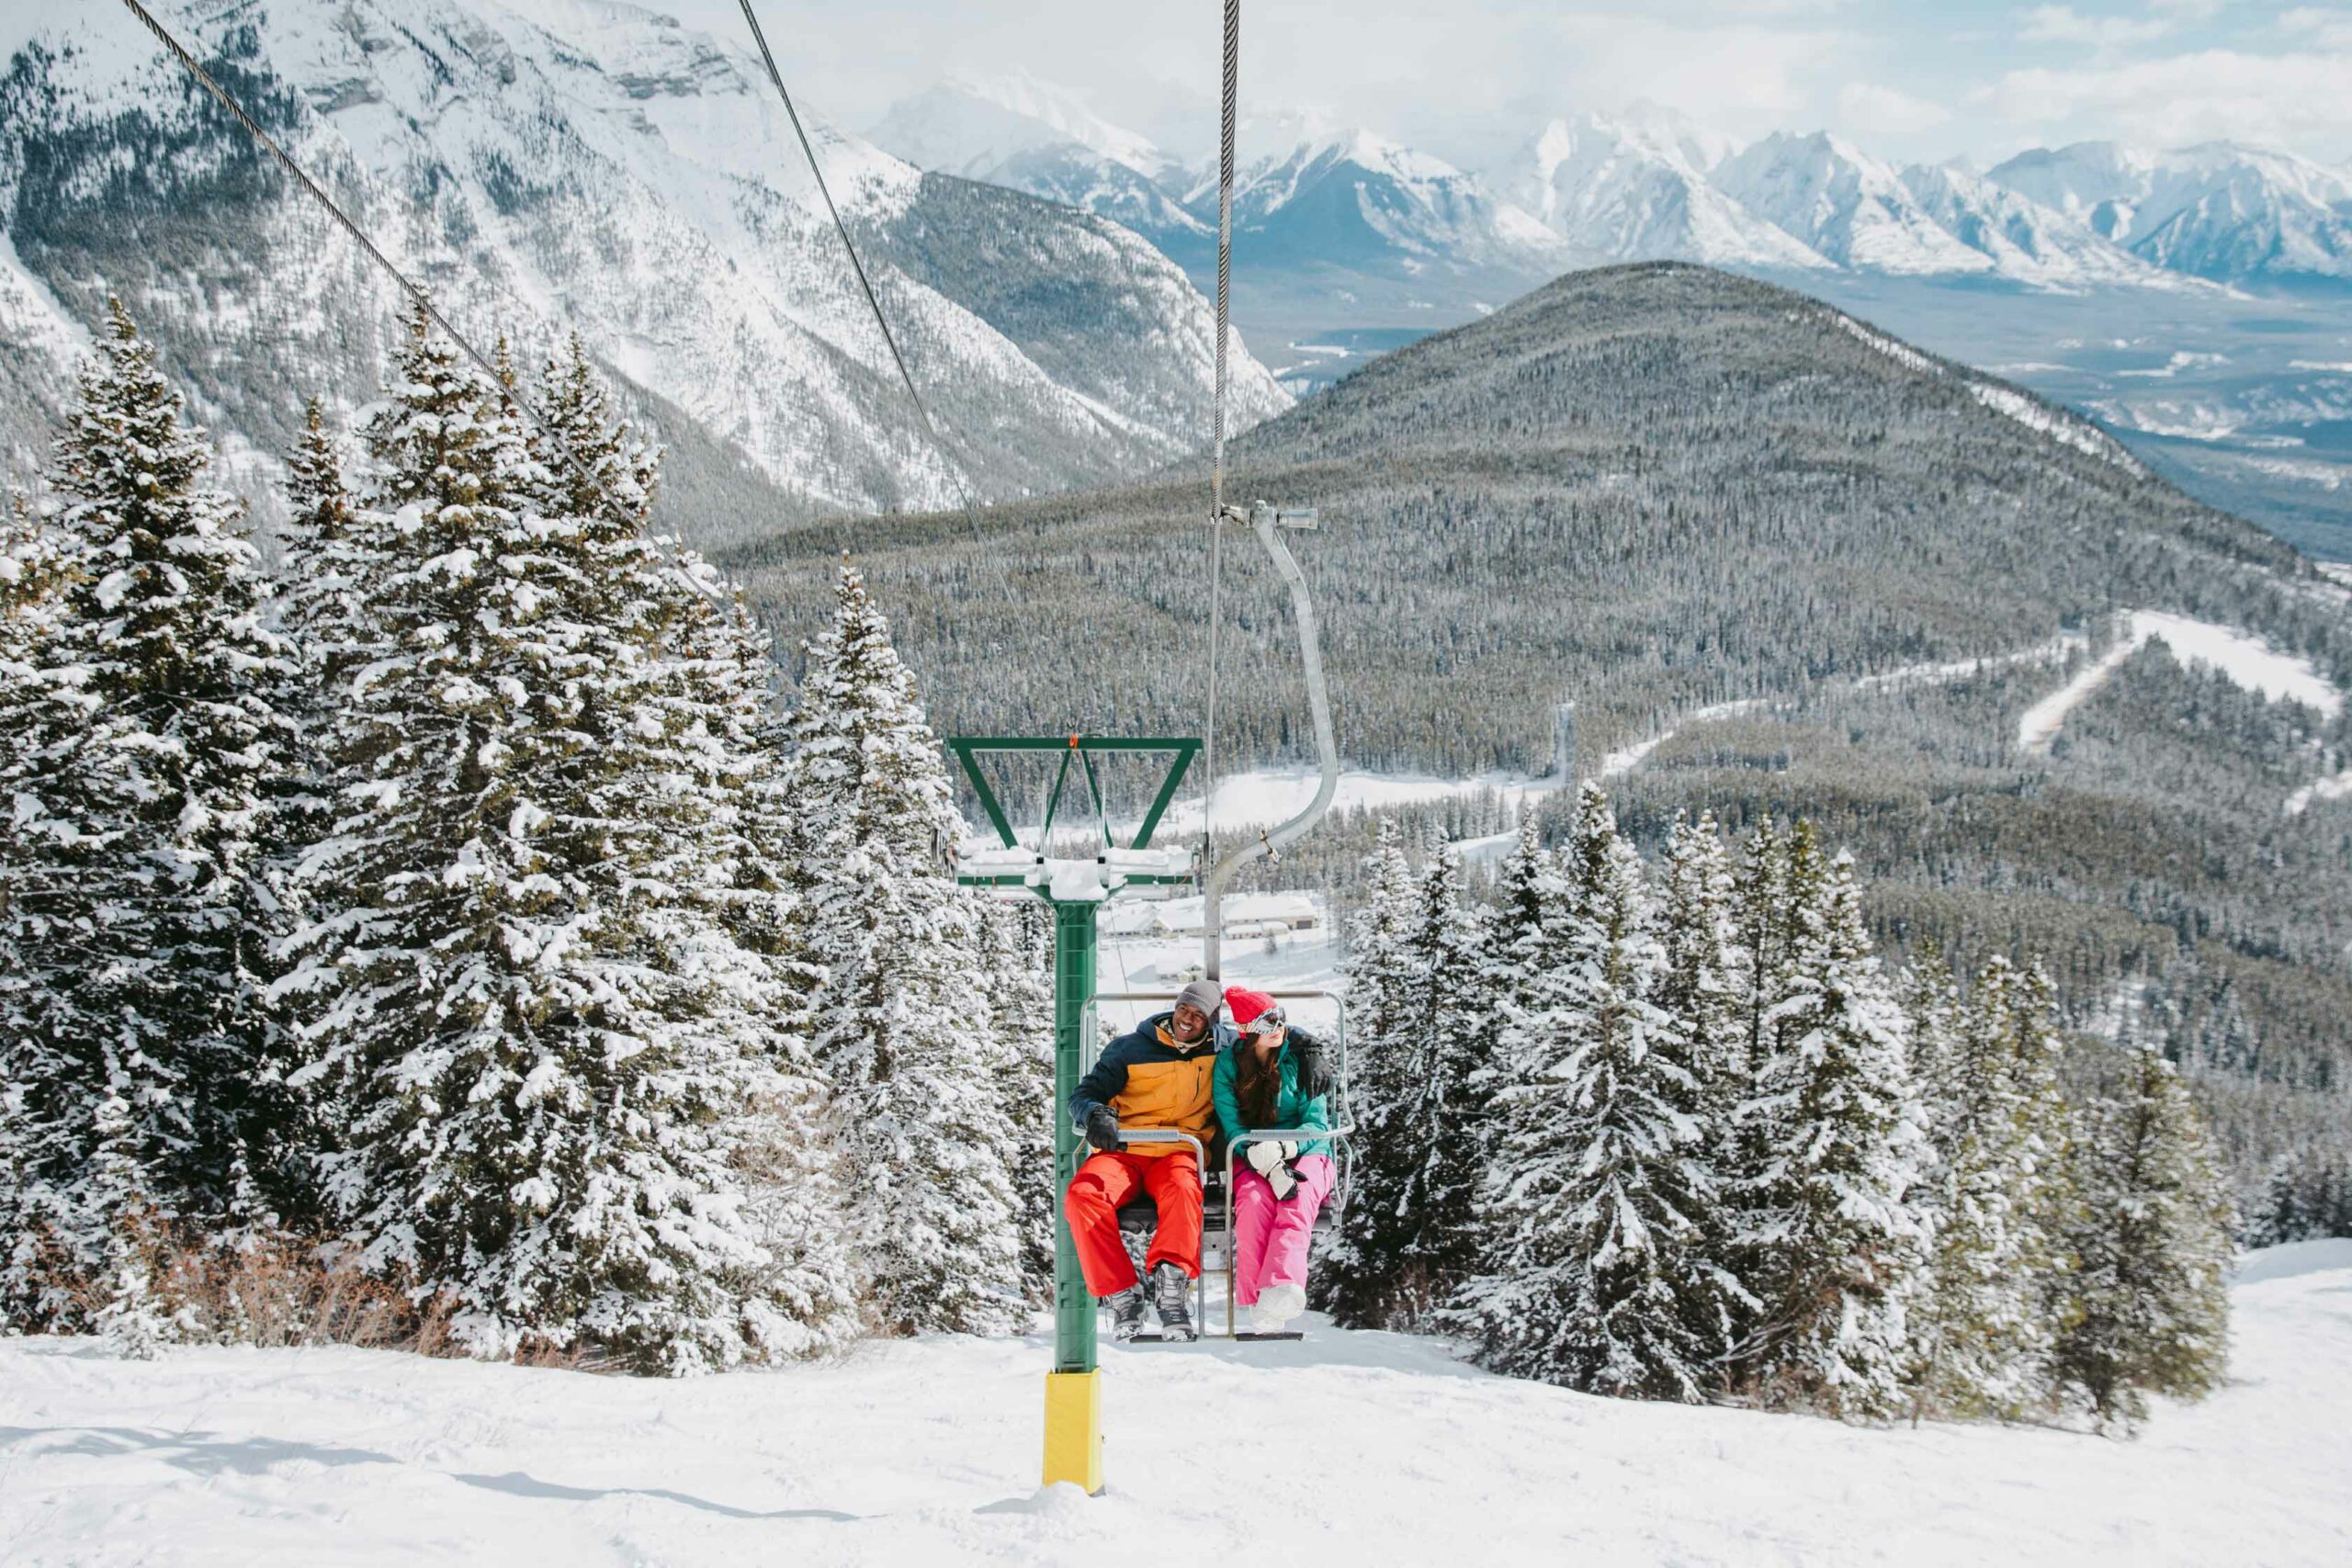 Find your new connection at Lifts of Love, the Valentine's Day event at Mount Norquay!